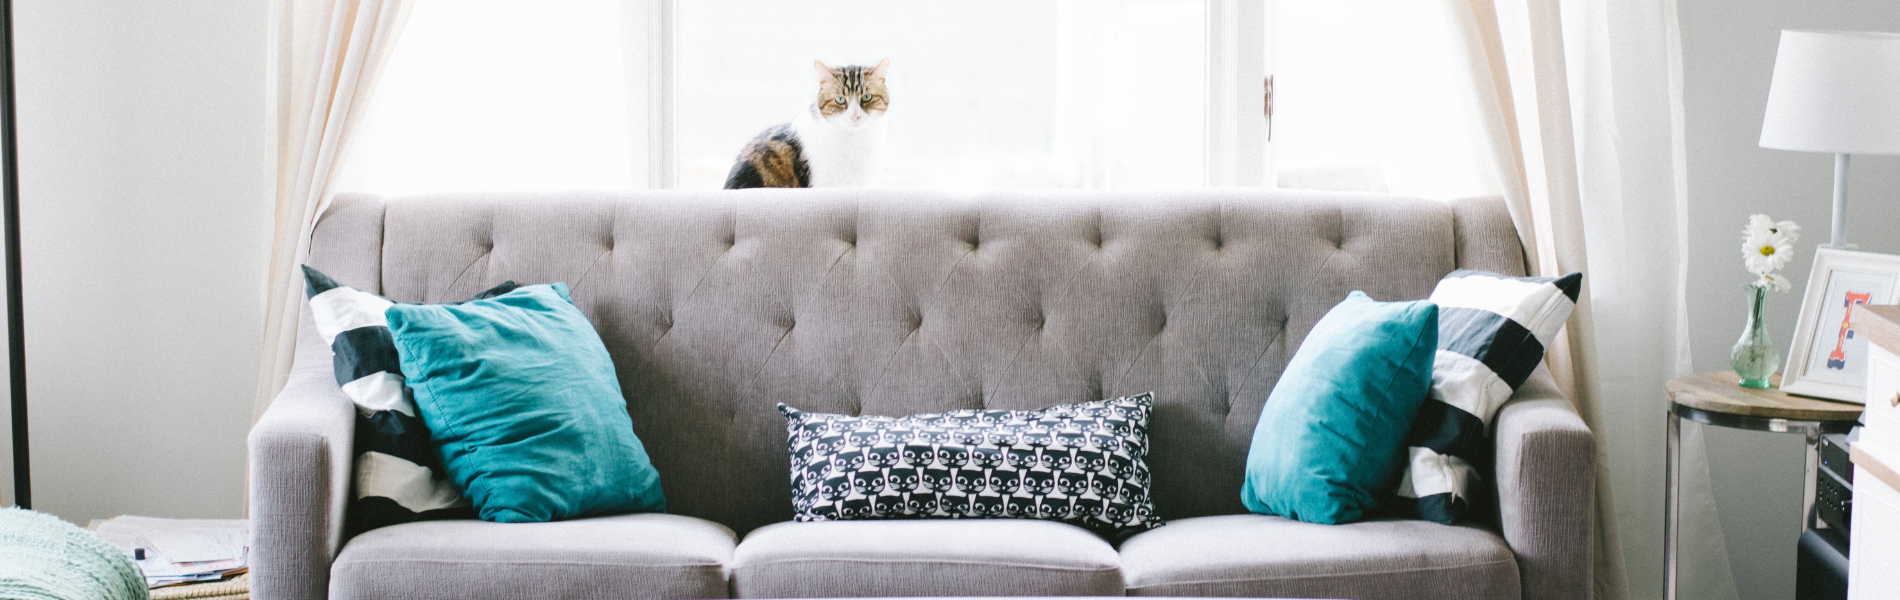 How to Clean Couch Cushions like the Pros